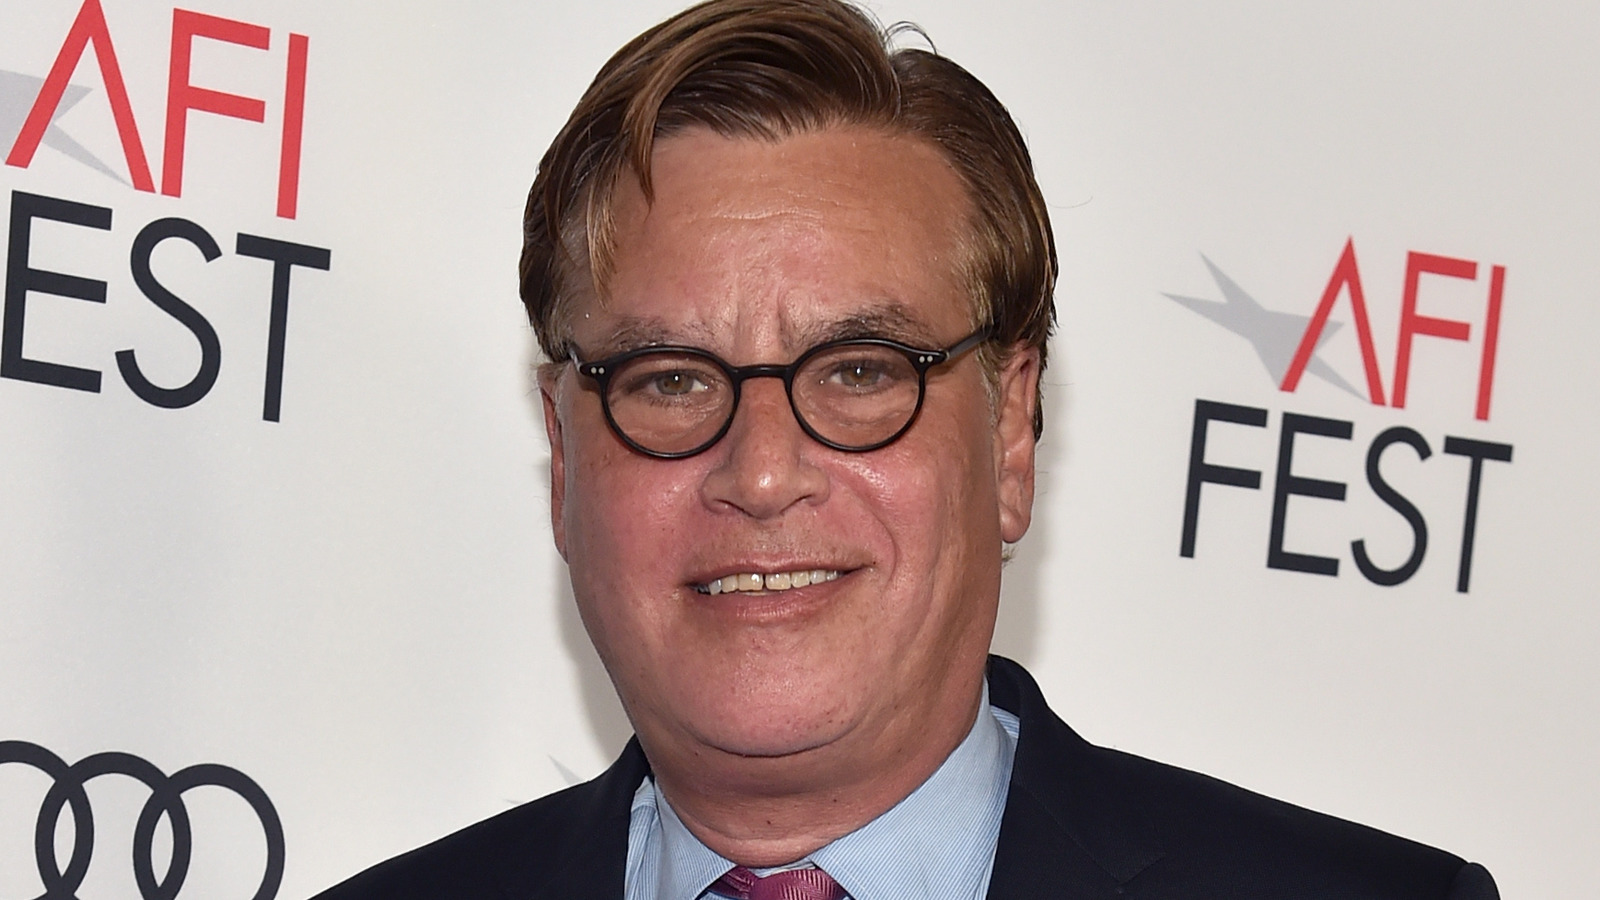 The bizarre injury Aaron Sorkin sustained while writing a fight scene